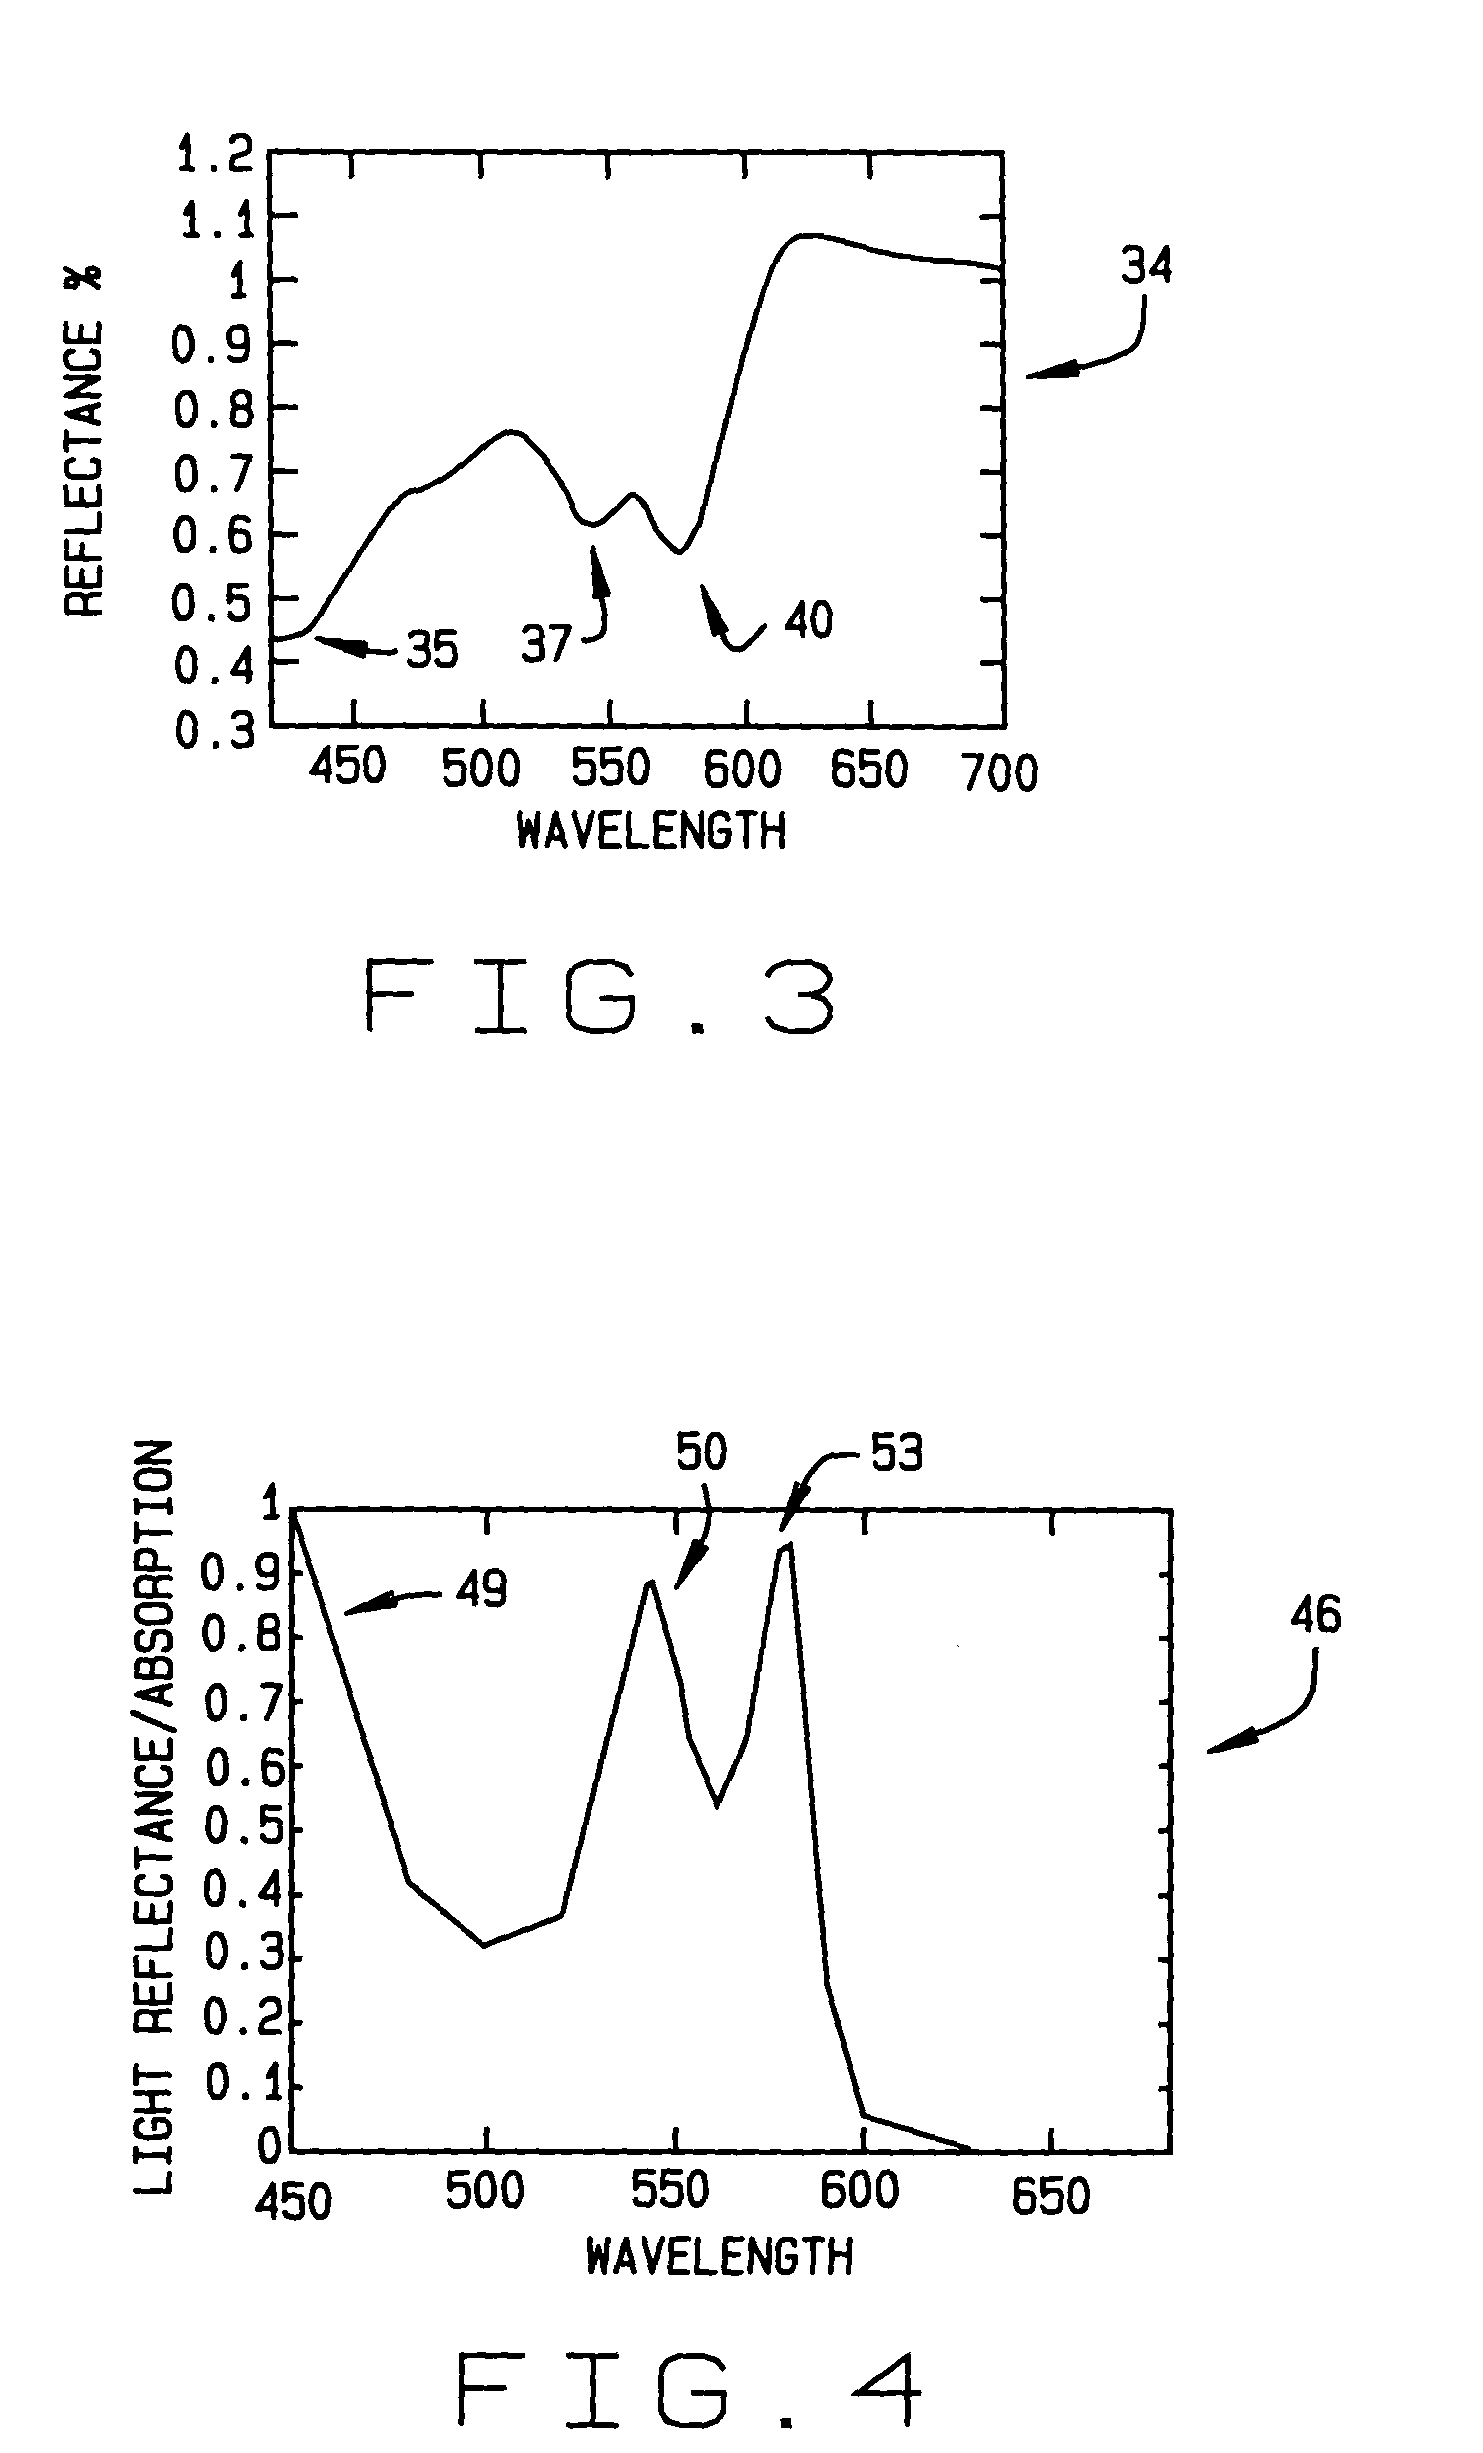 Hyper-spectral means and method for detection of stress and emotion